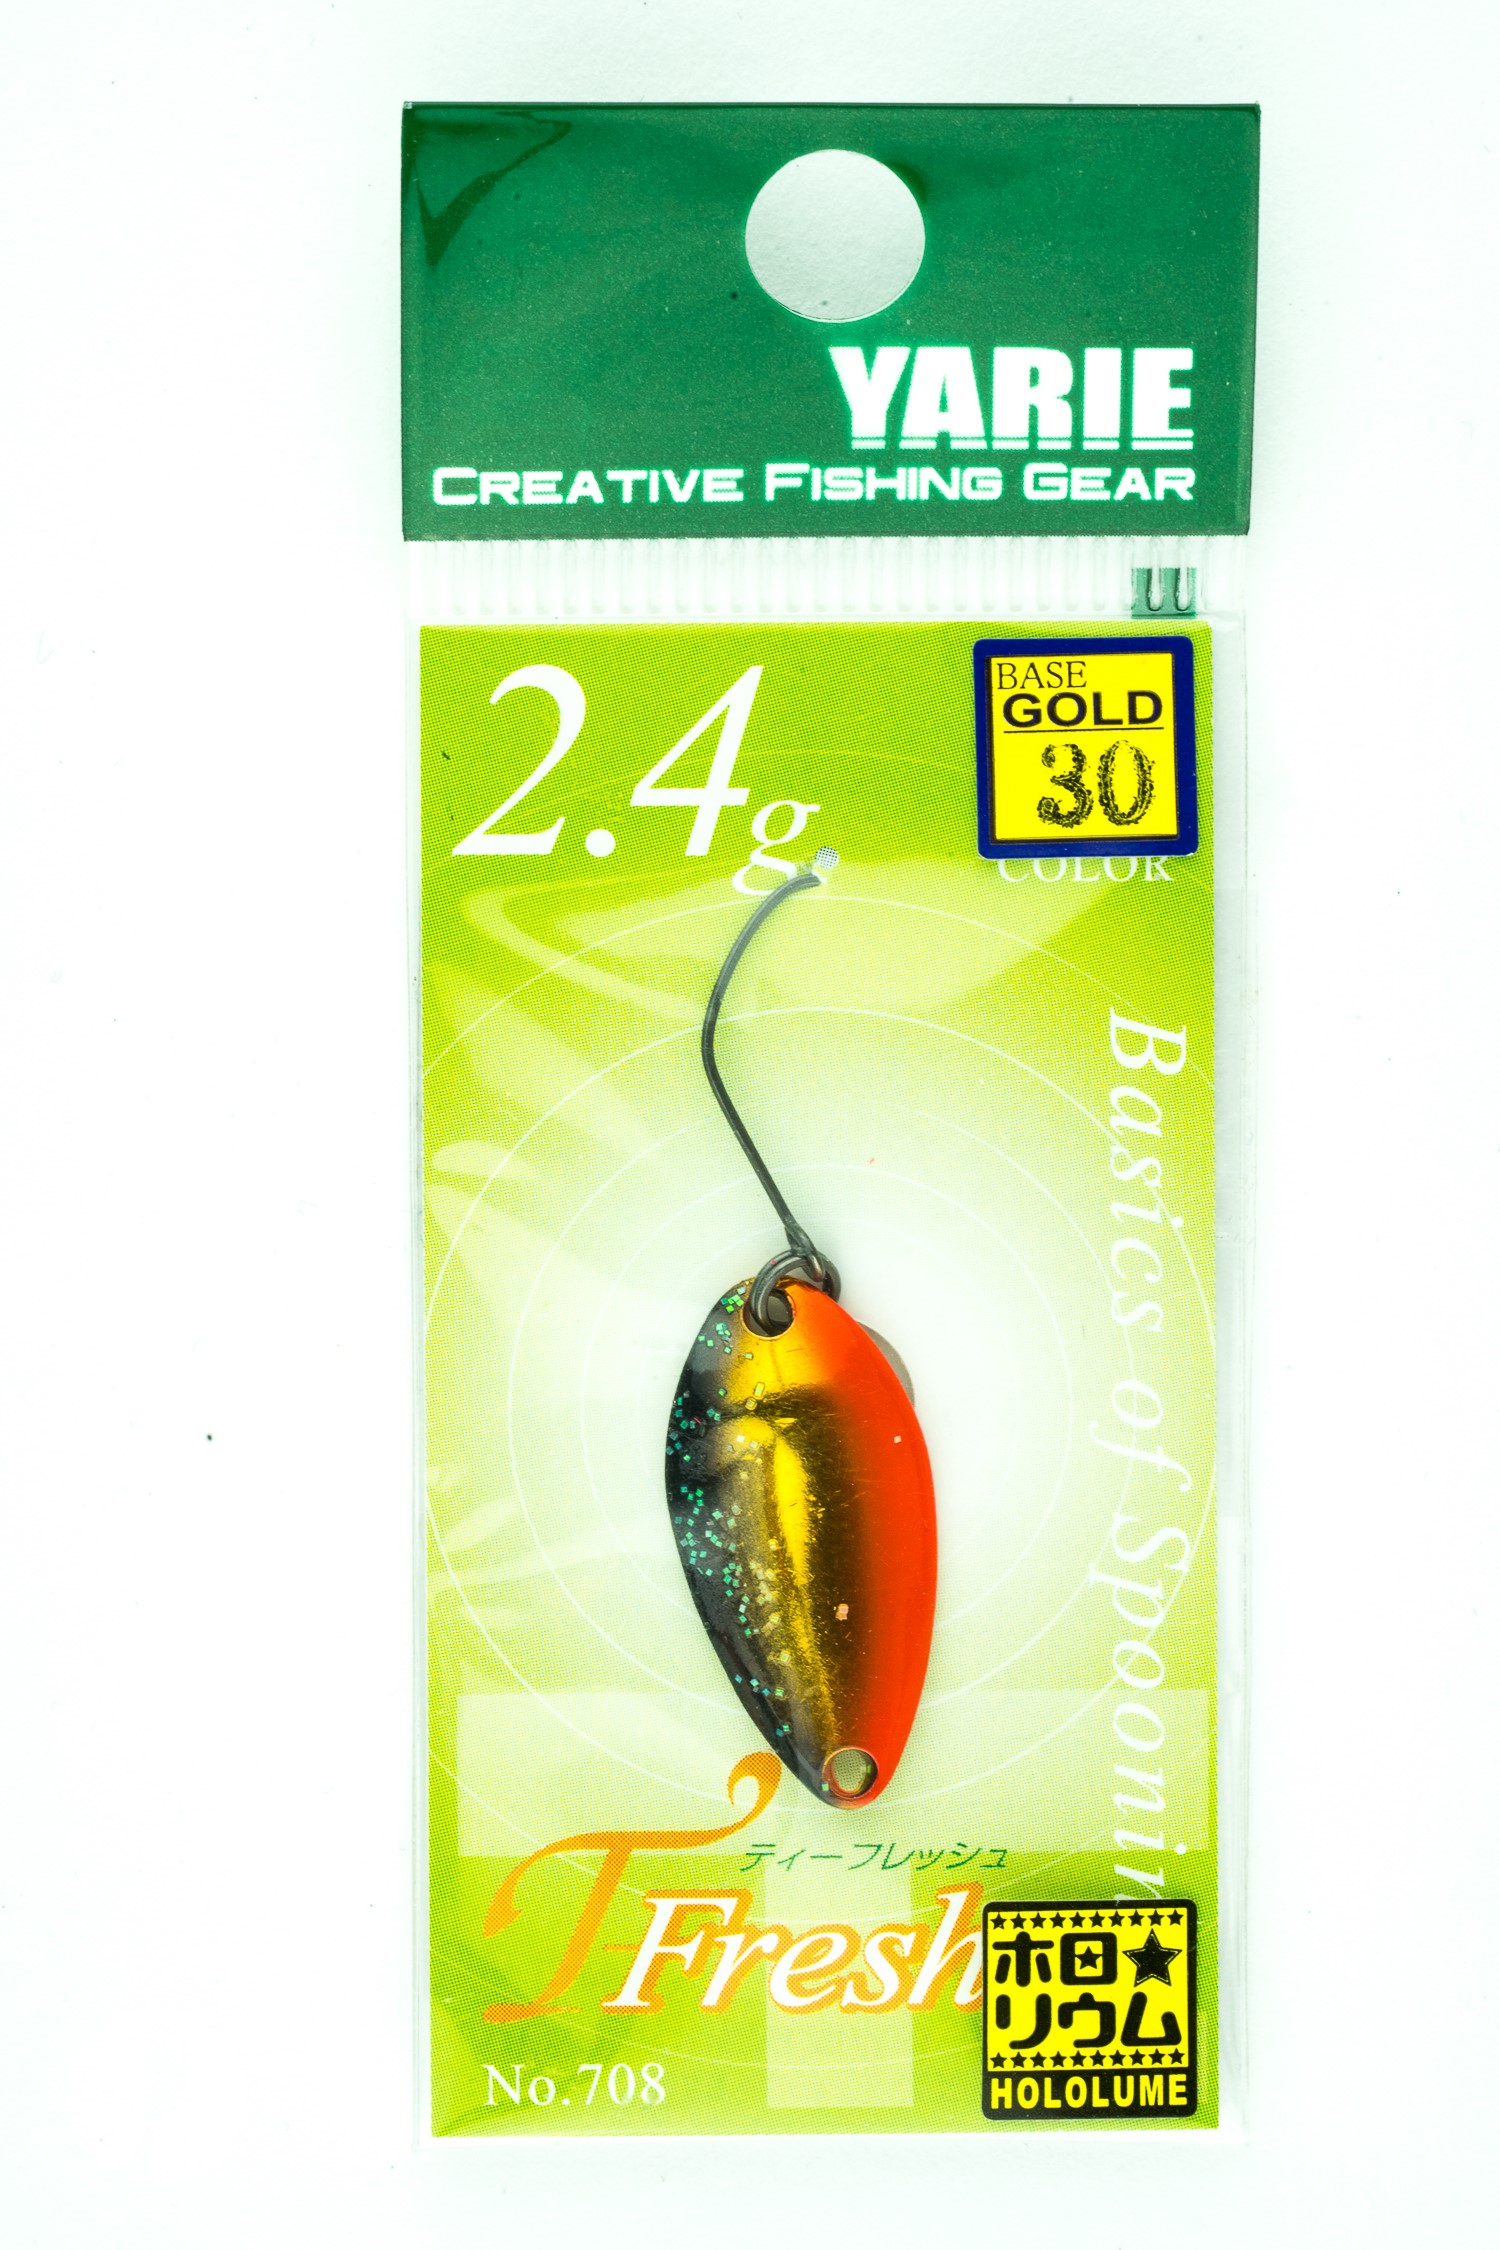 Yarie T-SPOON Bros Basic & Gradation Spark 1.4 g Assorted Colors Trout Spoon 